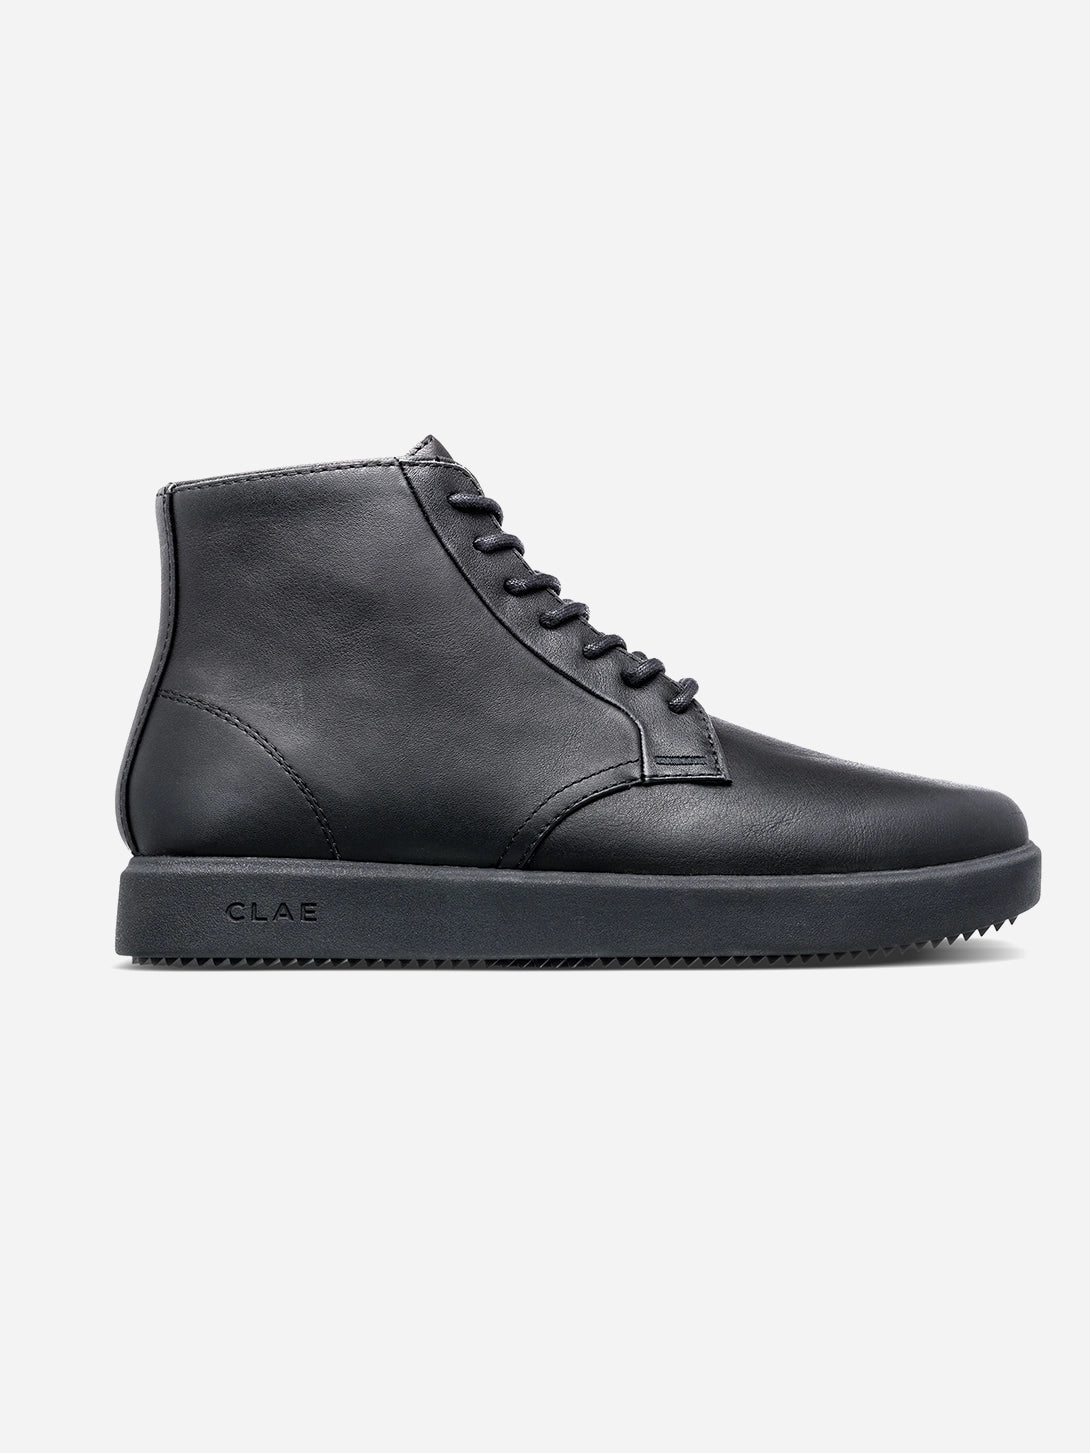 Triple Black Leather Boots Clae High Tops O.N.S Clothing